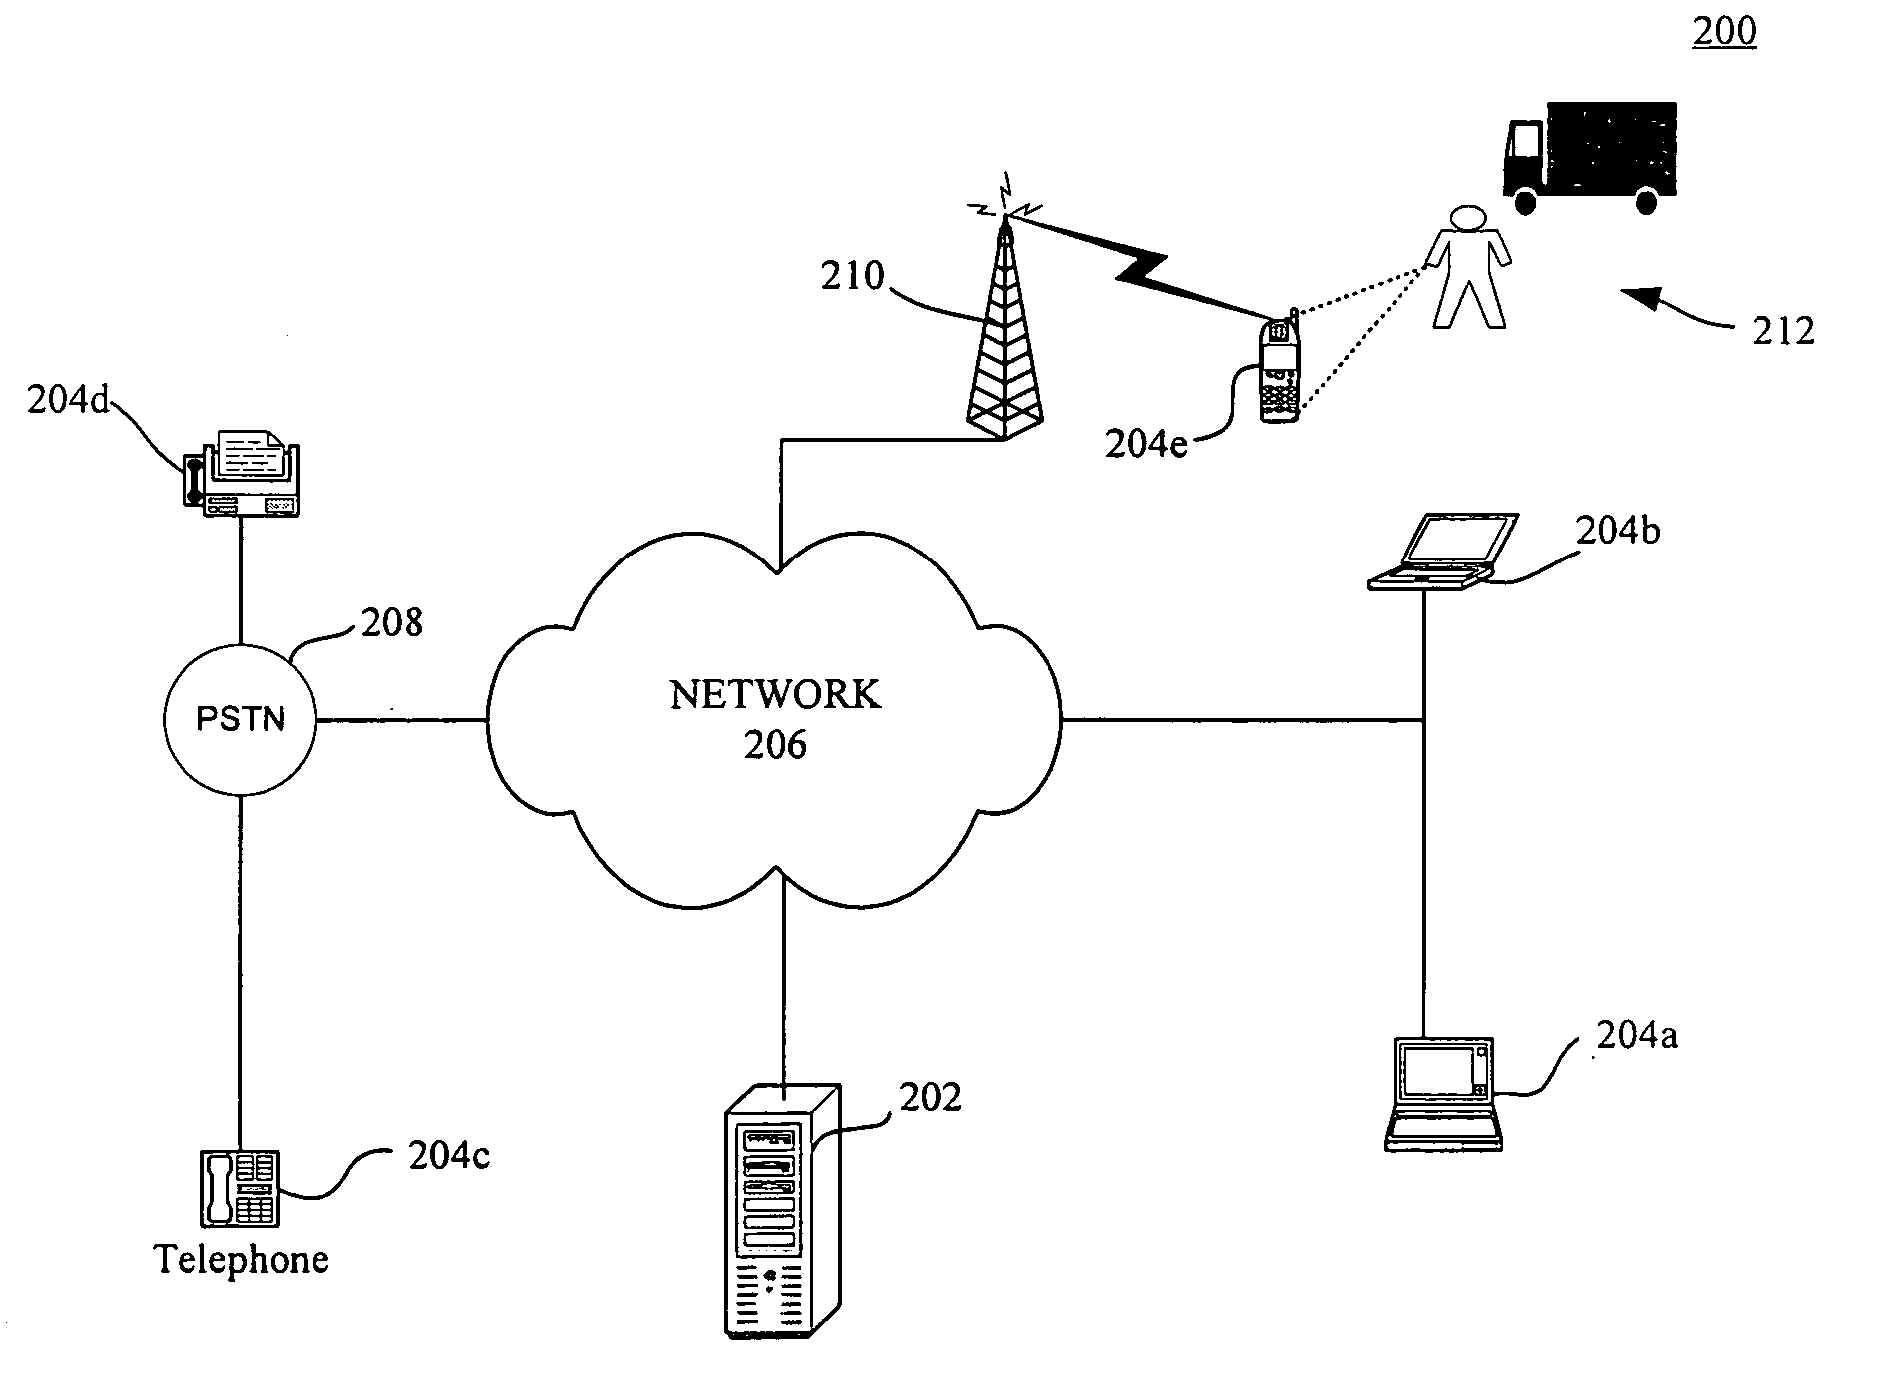 Systems, device, and methods for efficient vegetation maintenance at multiple infrastructure sites